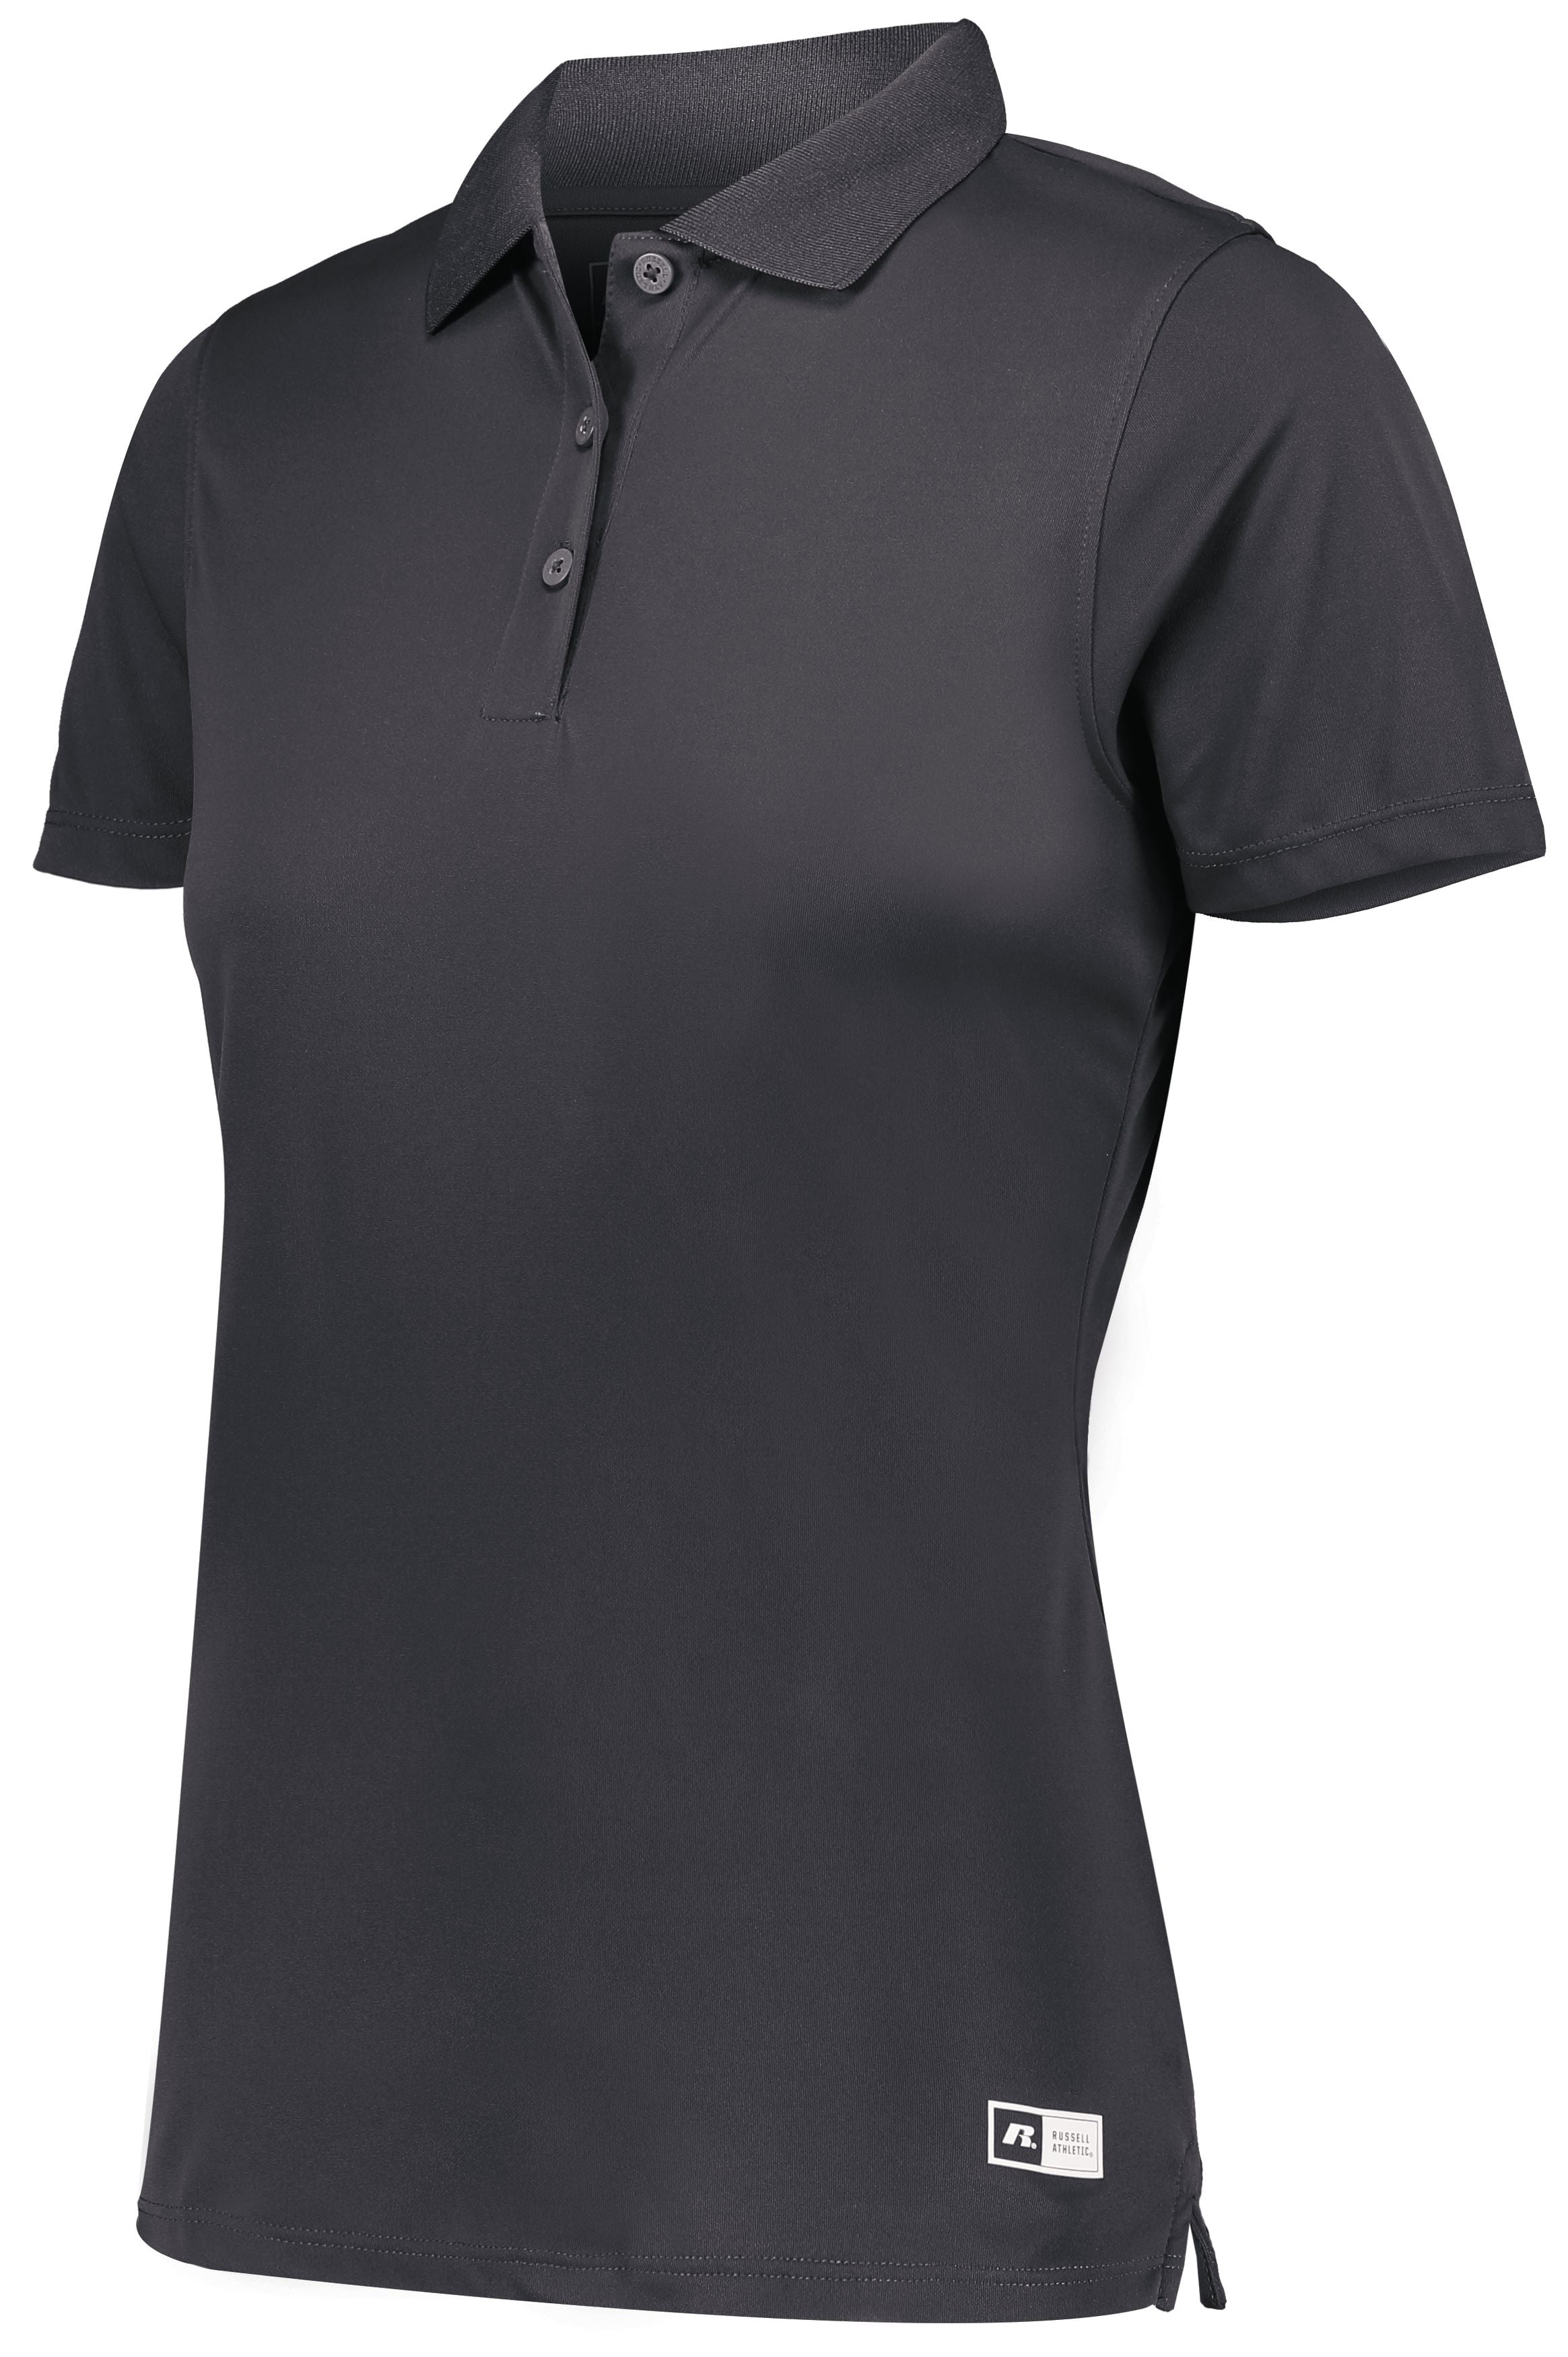 Russell Athletic Ladies Essential Polo in Stealth  -Part of the Ladies, Ladies-Polo, Polos, Russell-Athletic-Products, Shirts, Corporate-Collection product lines at KanaleyCreations.com